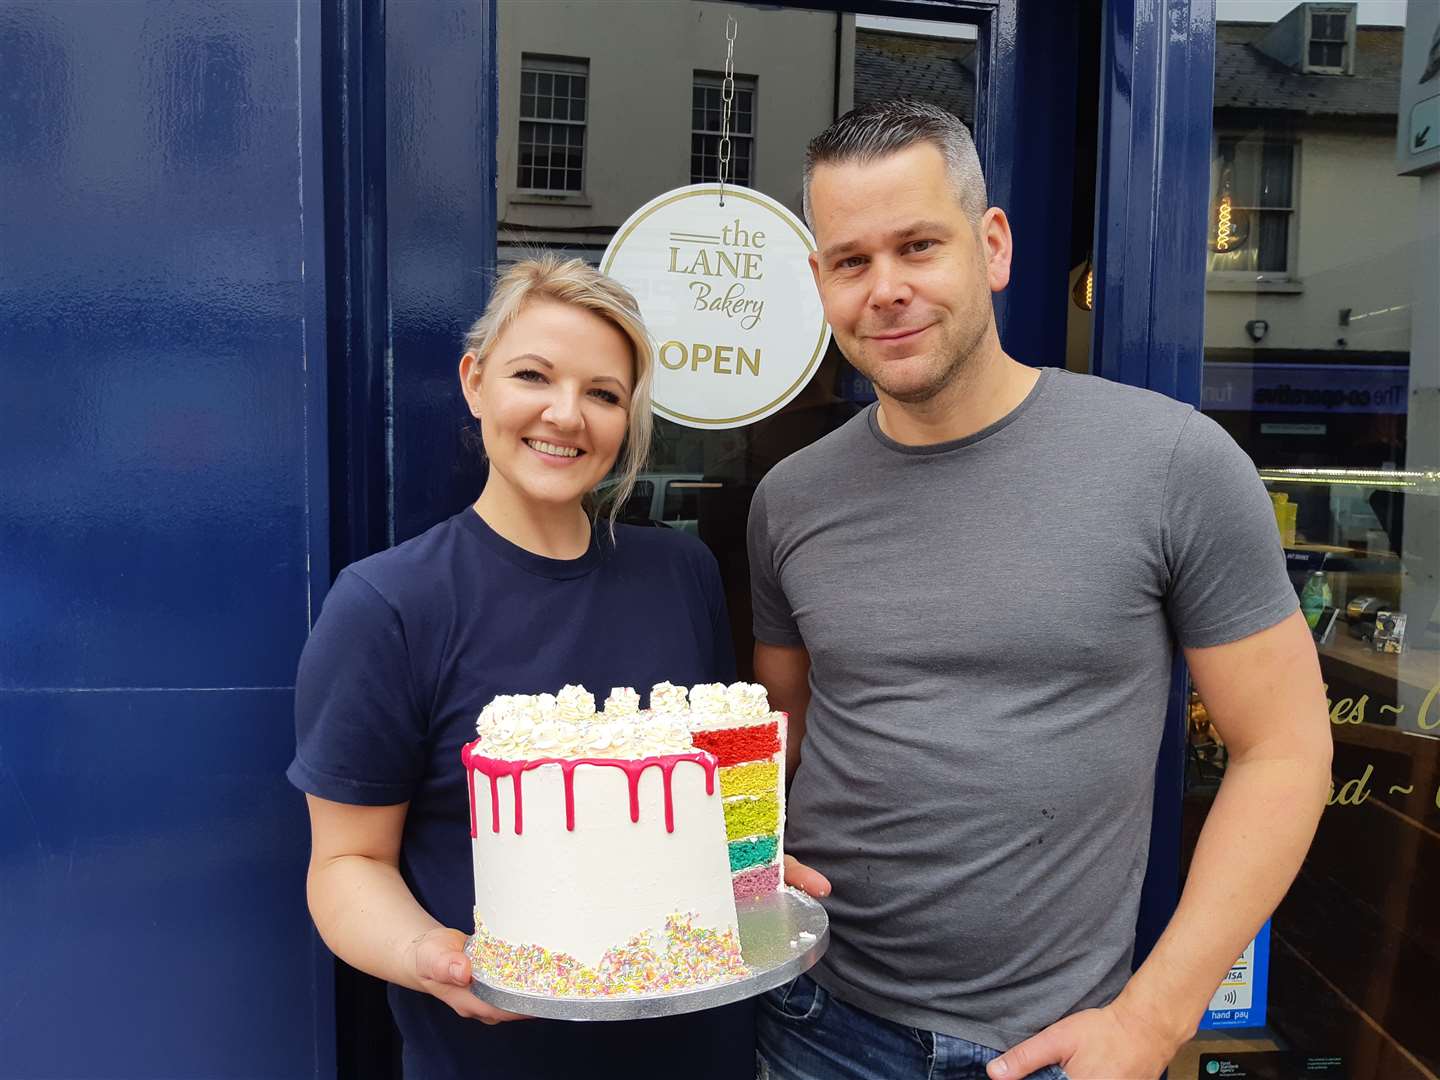 Anna Murray and Chris Vidler are celebrating The Lane Bakery's first birthday... with cake!